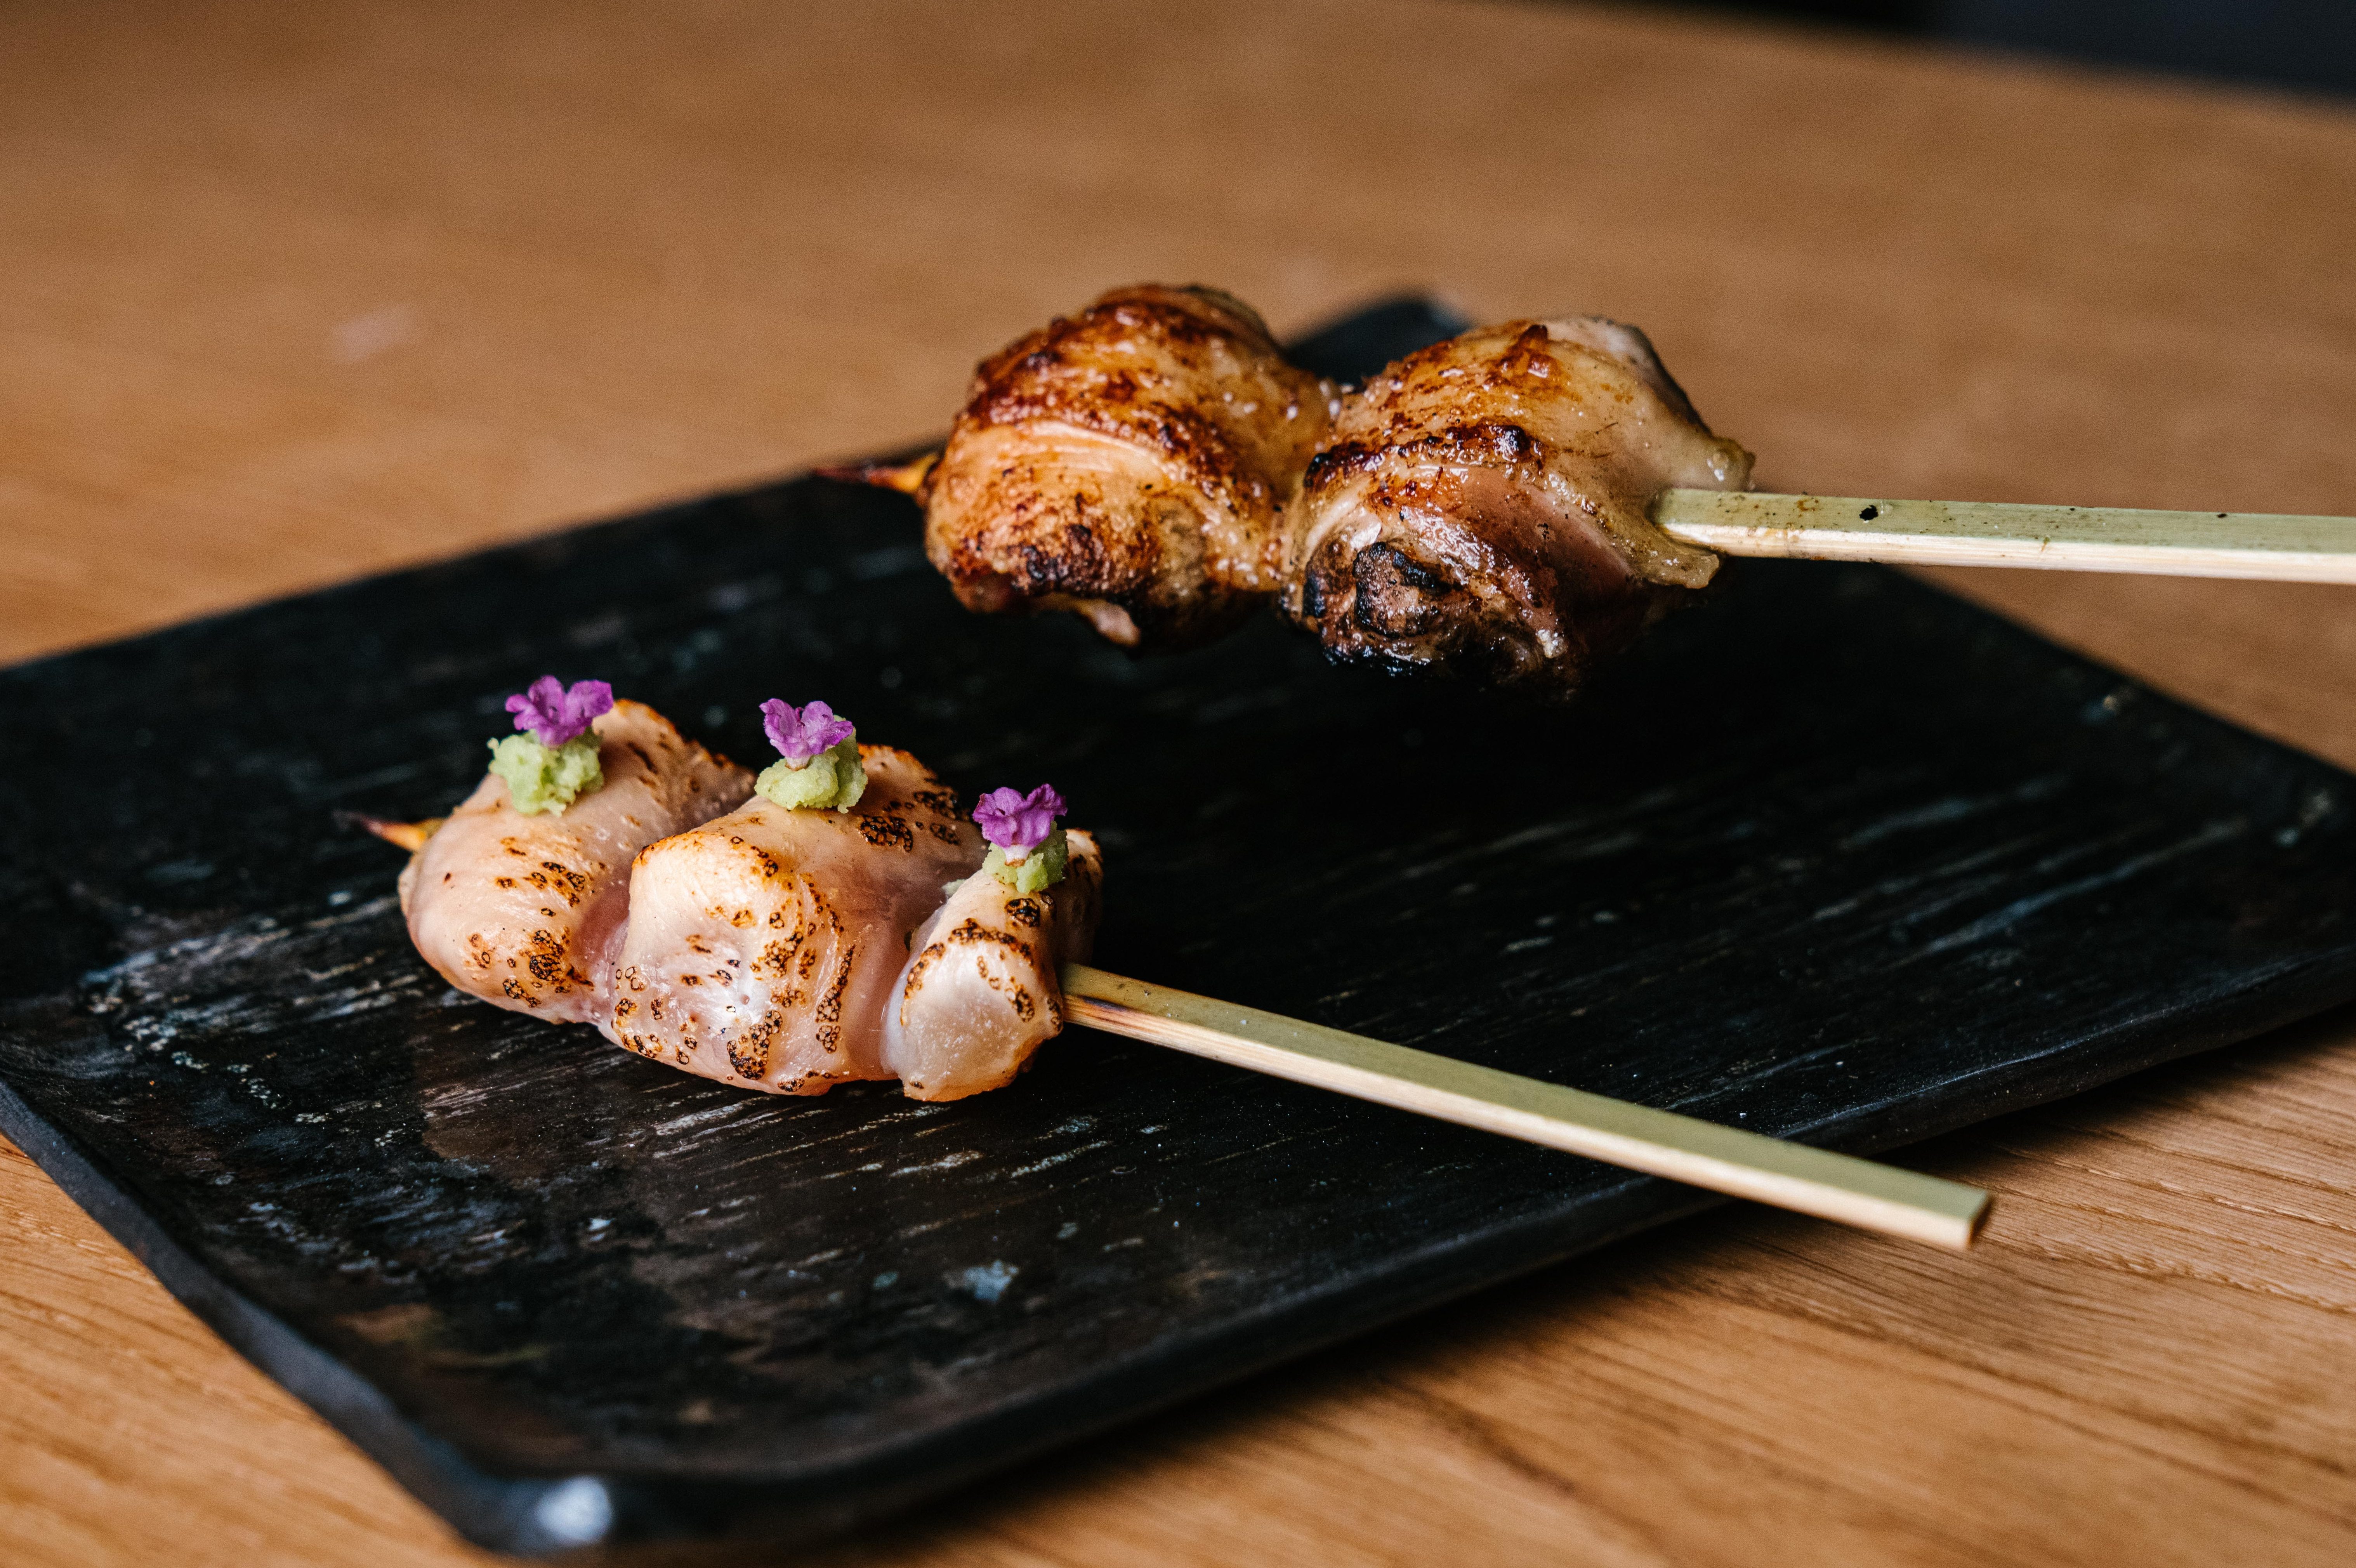 Yakitori ("yaki" meaning "to grill" and "tori" meaning "bird") has a storied history in Japan